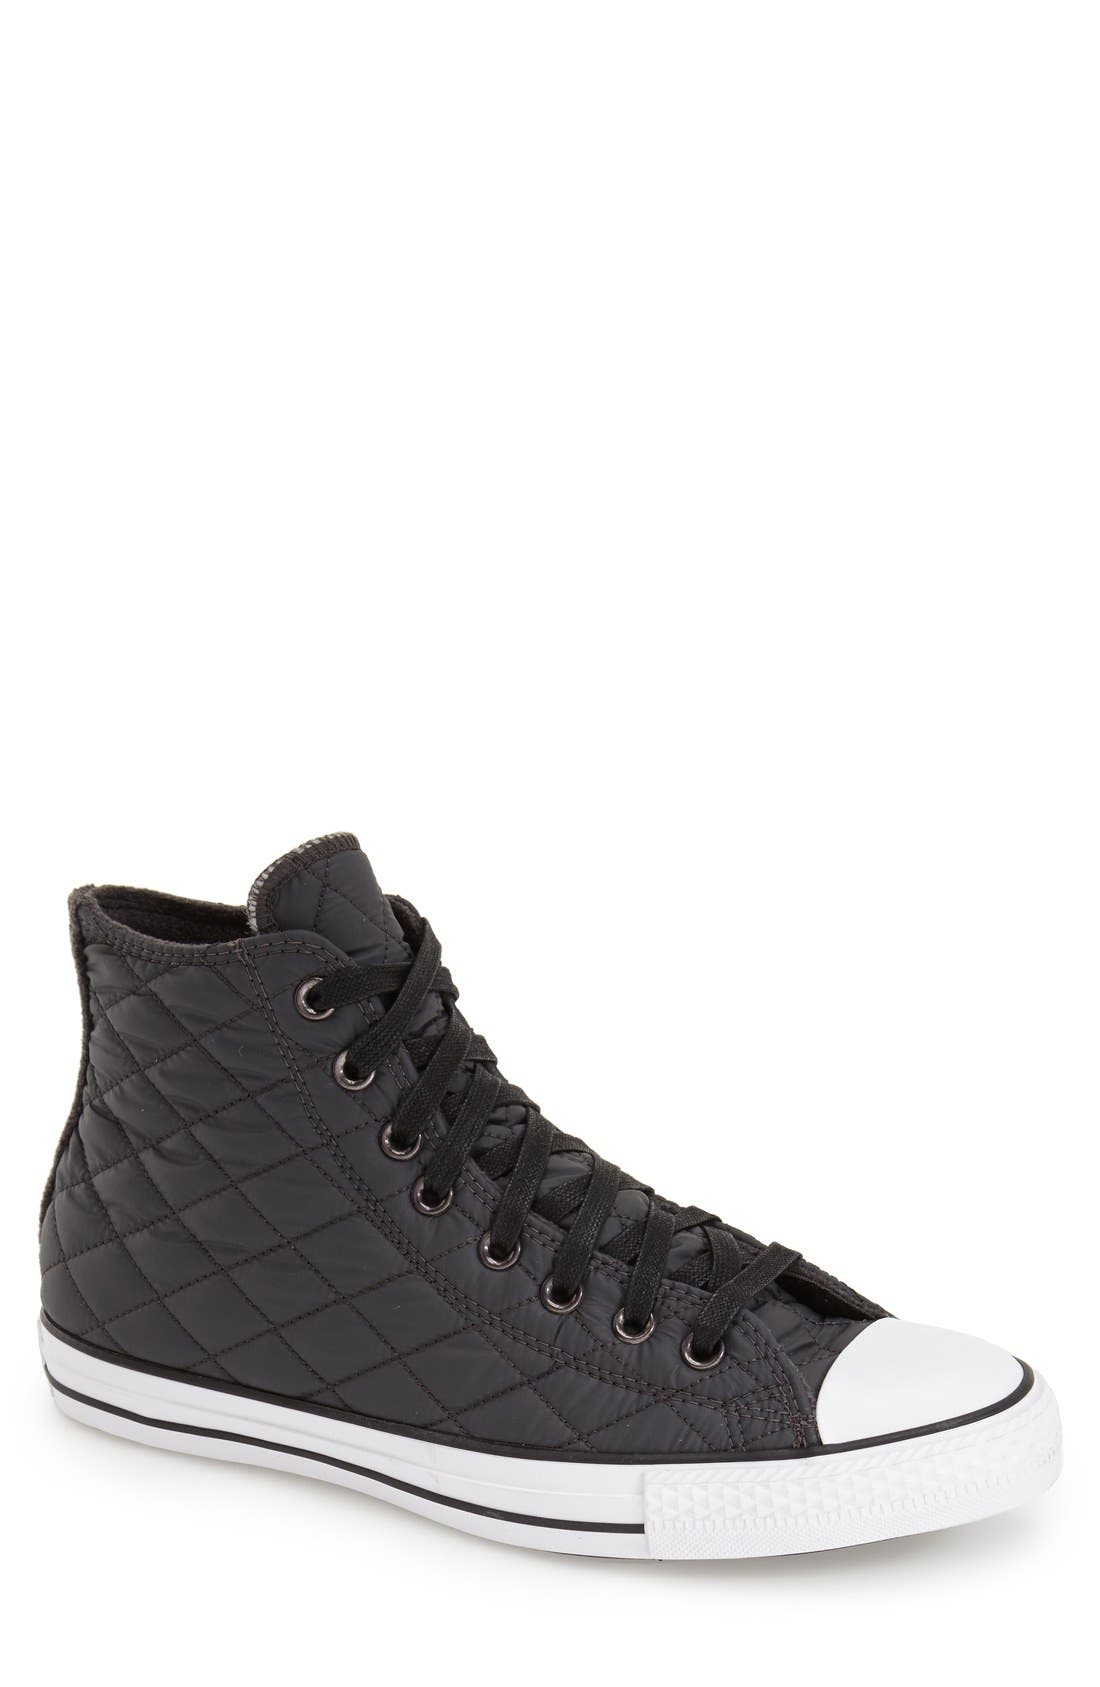 converse men's chuck taylor all star quilted hi